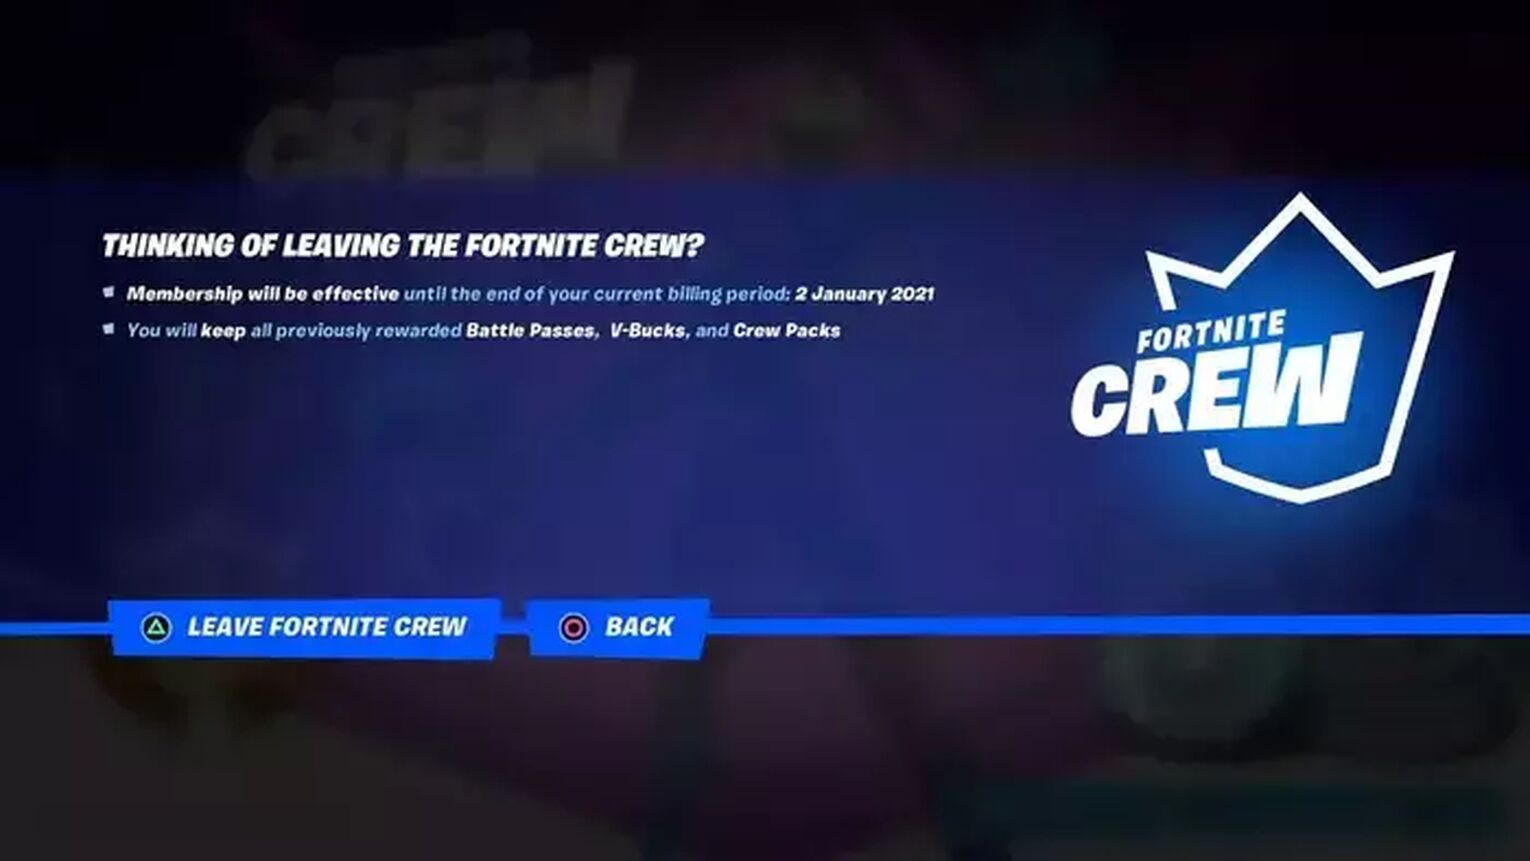 Cancel Your Fortnite Crew Subscription on PlayStation